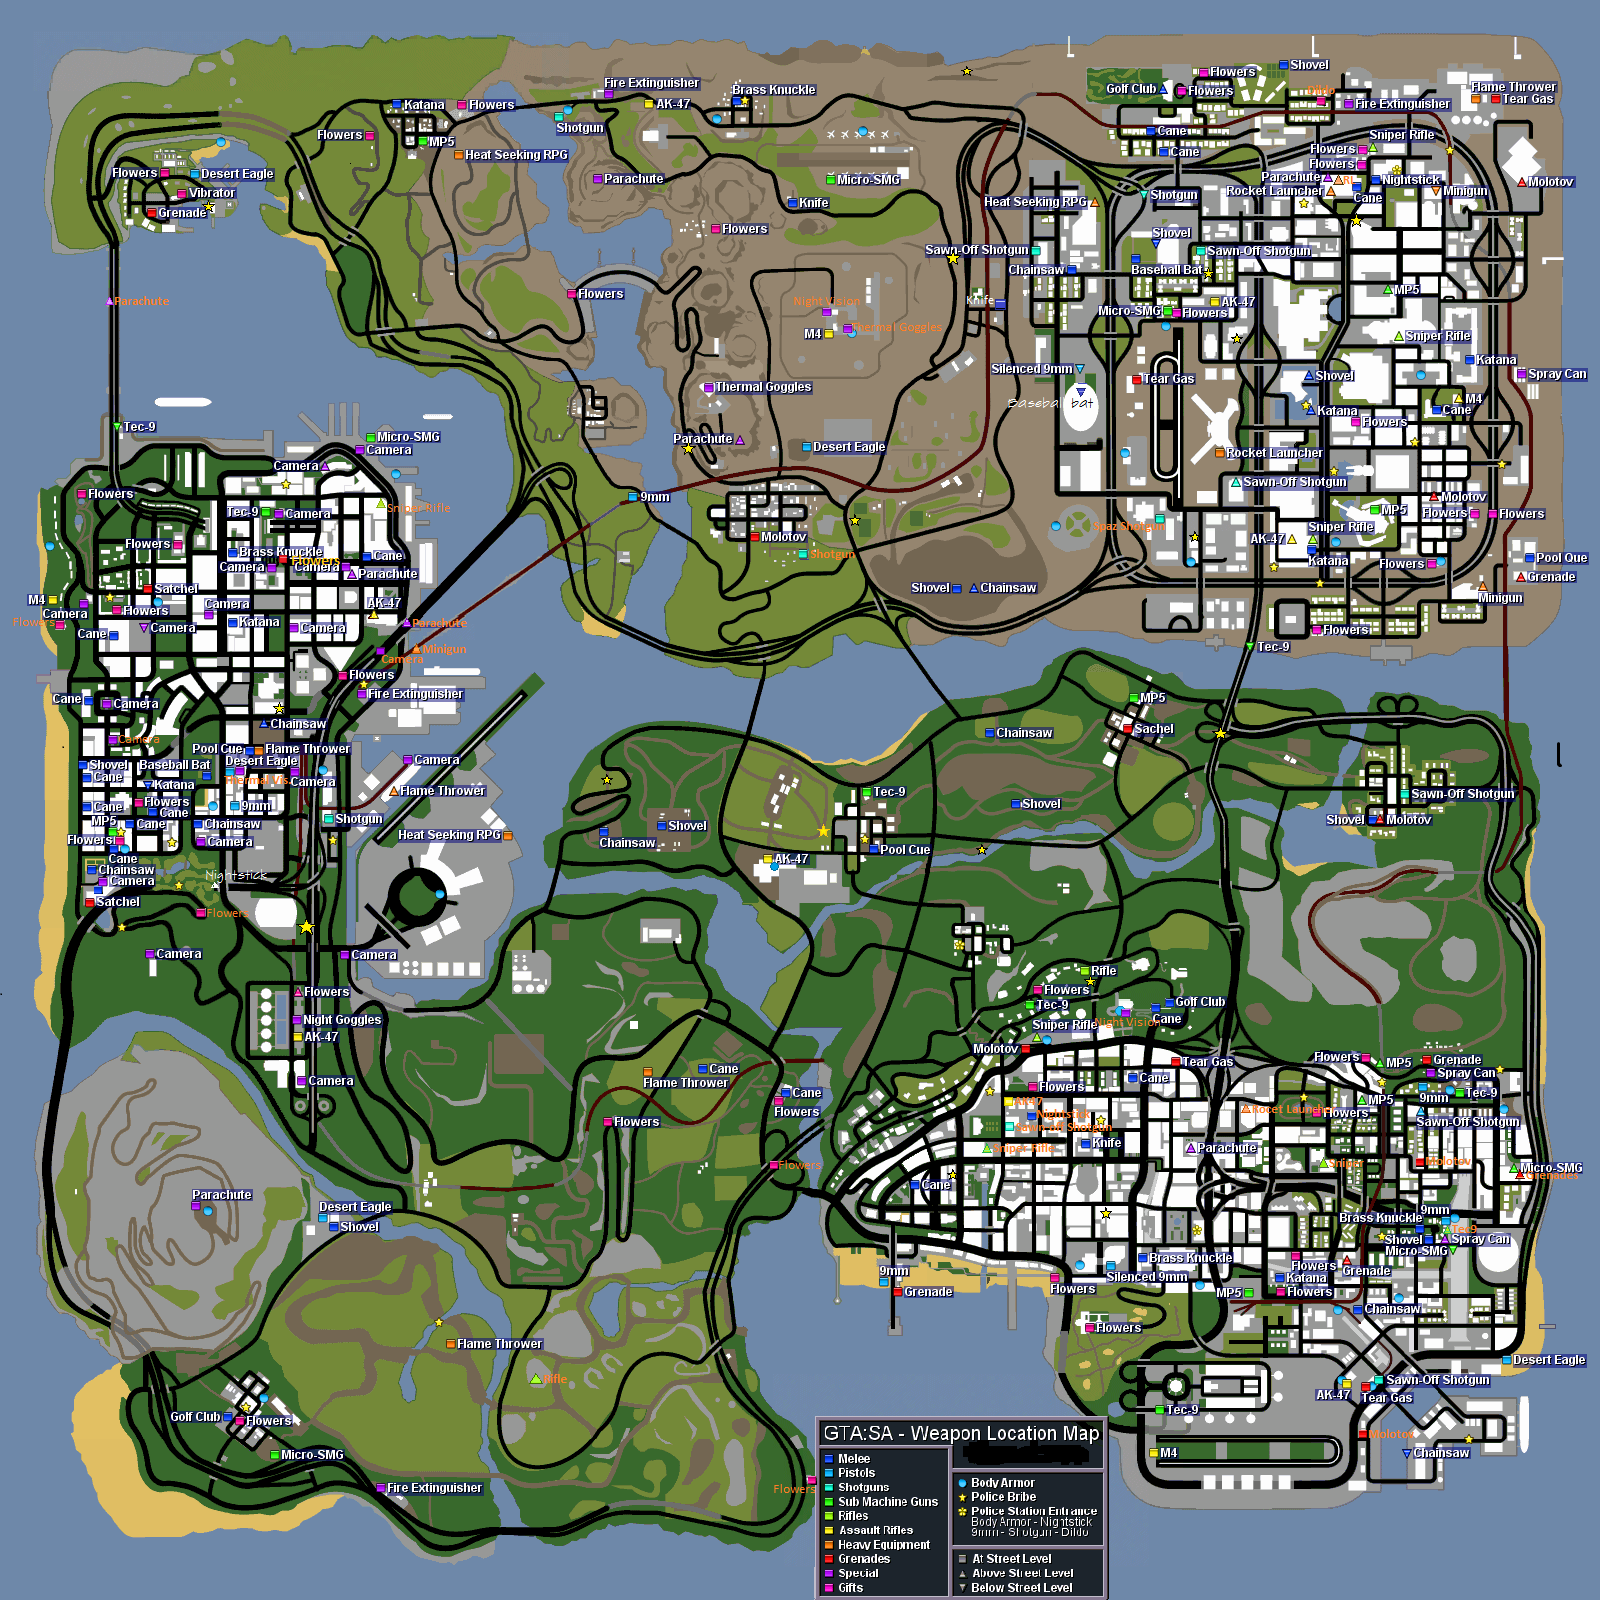 Weapons Locations - Guides & Strategies - GTAForums